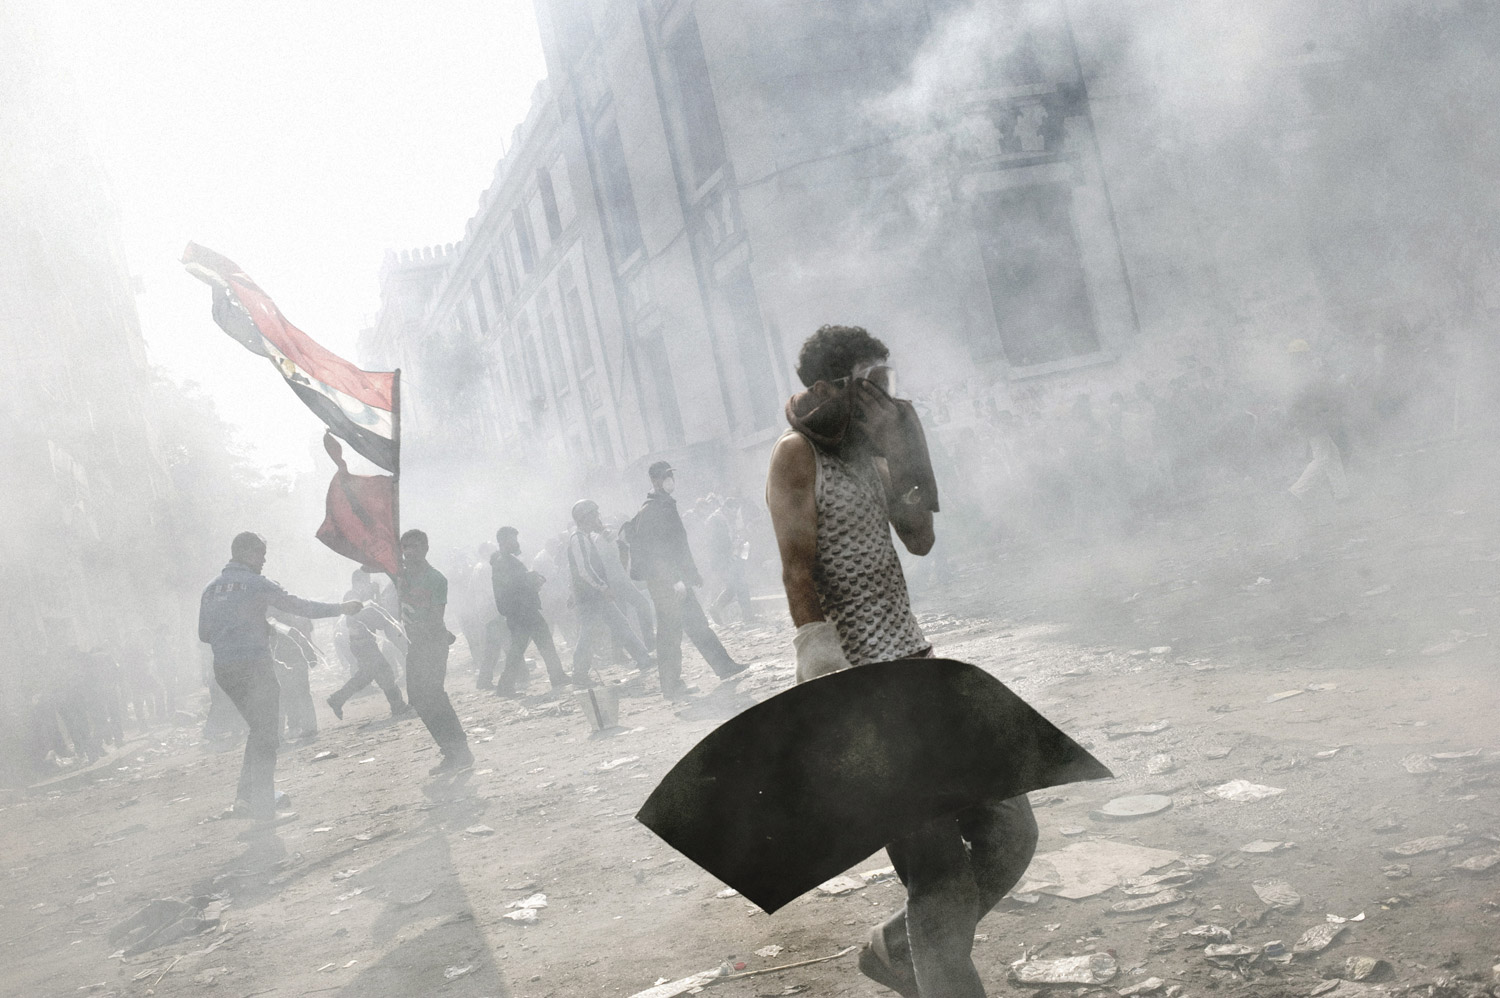 Tear gas fired by Egyptian security forces blankets a group of protesters, November 23, 2011.